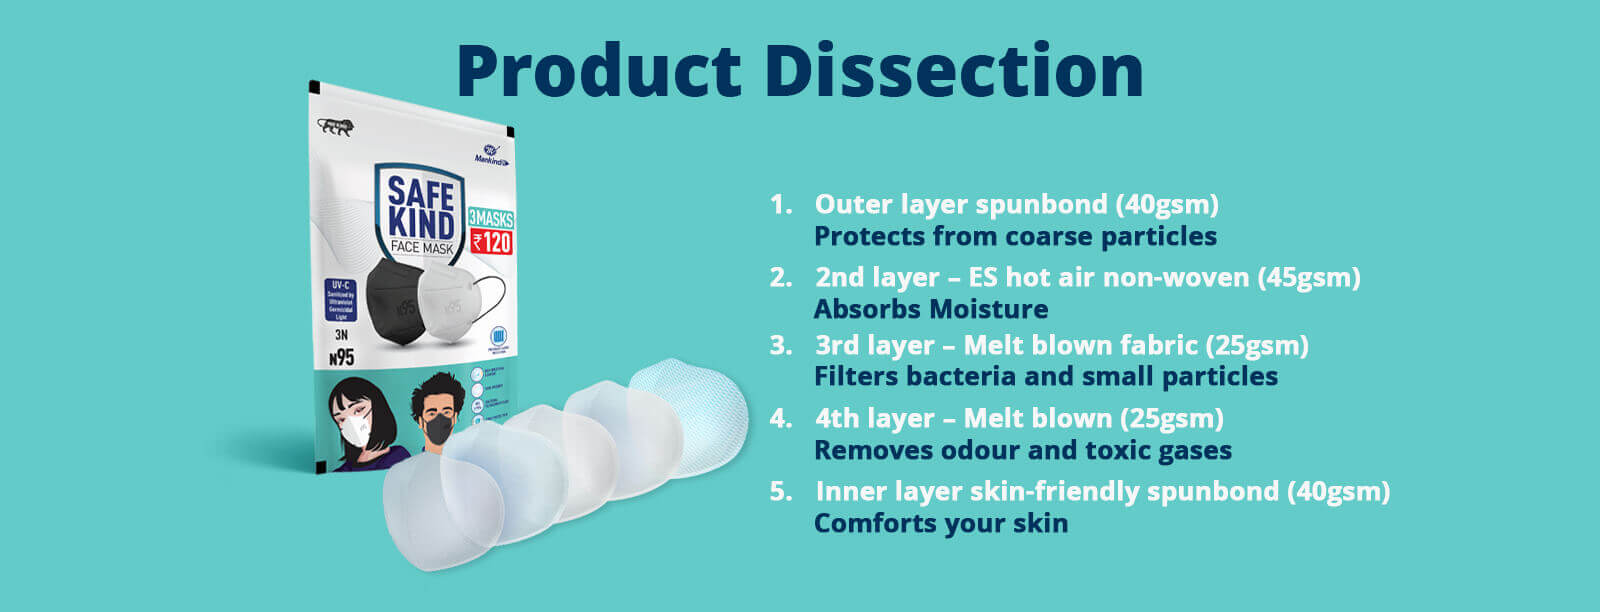 Products Dissection